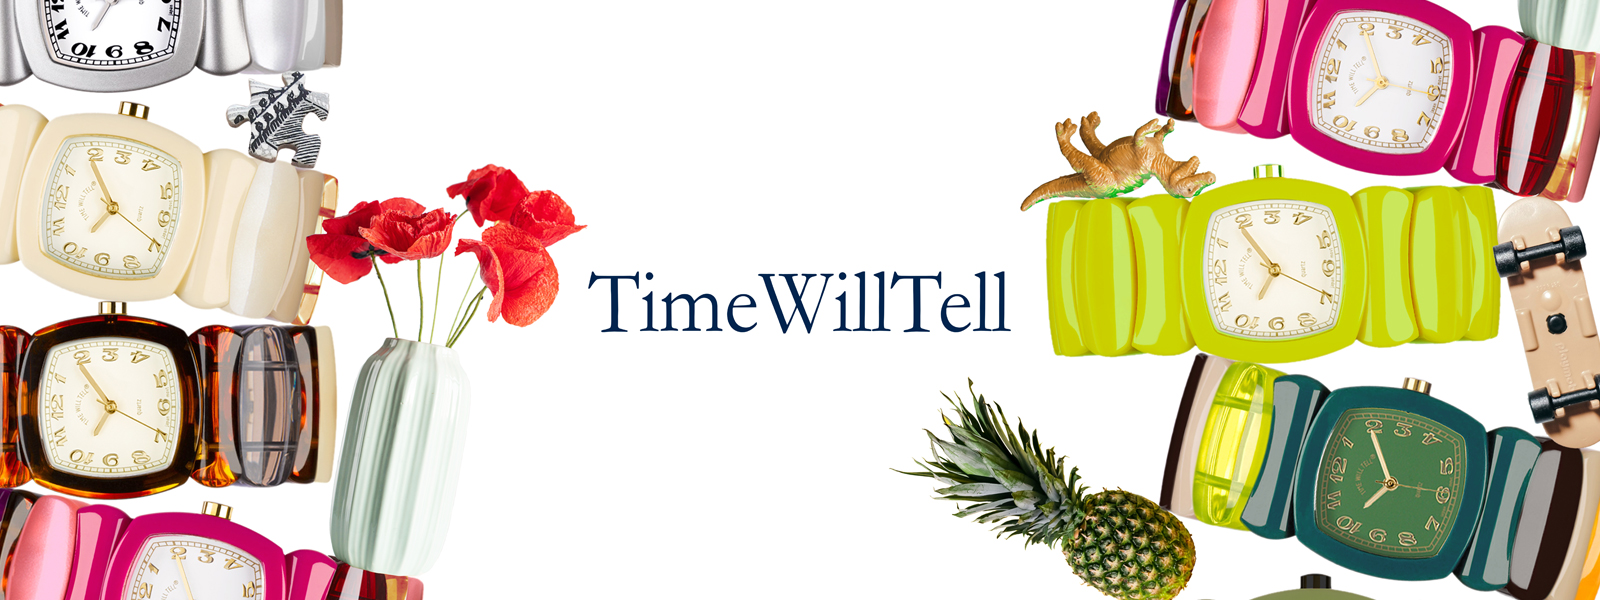 TIME WILL TELL banner